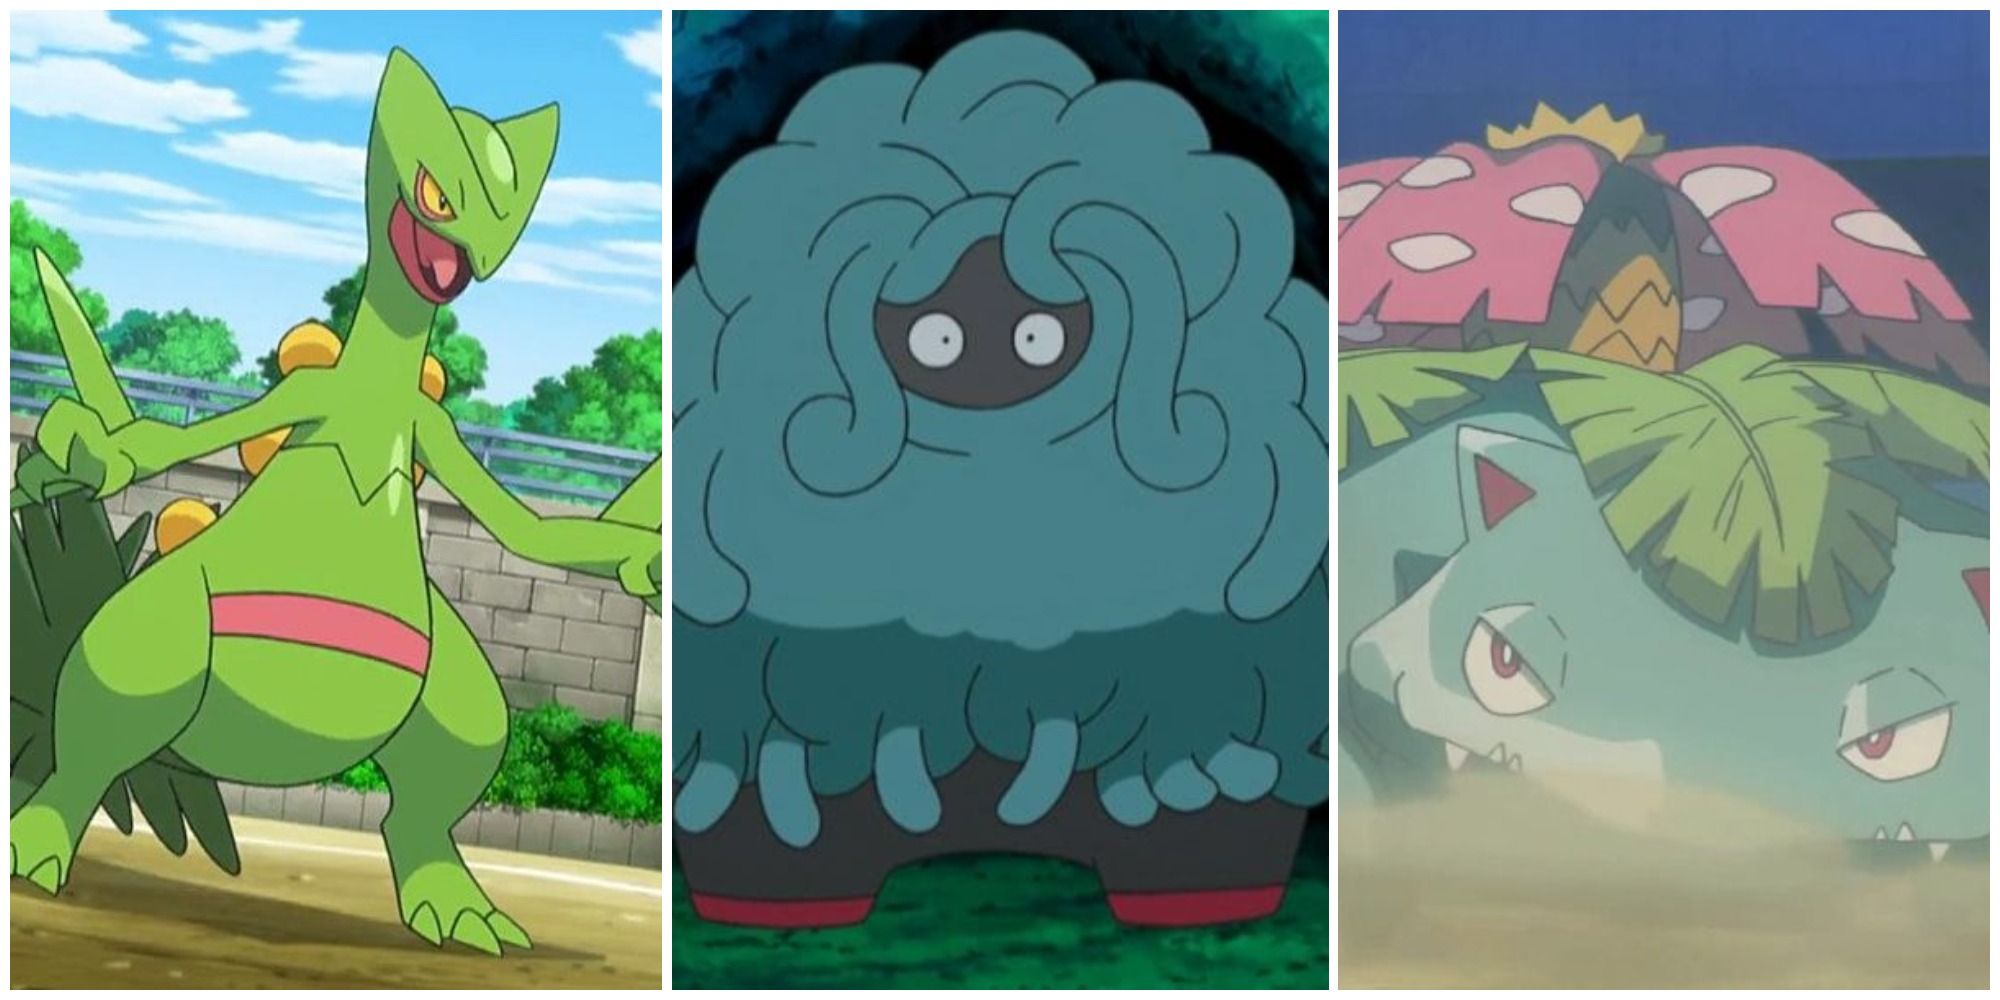 Pokemon Sword & Shield: 10 Pokemon That Are Underrated In Online Ranked Play